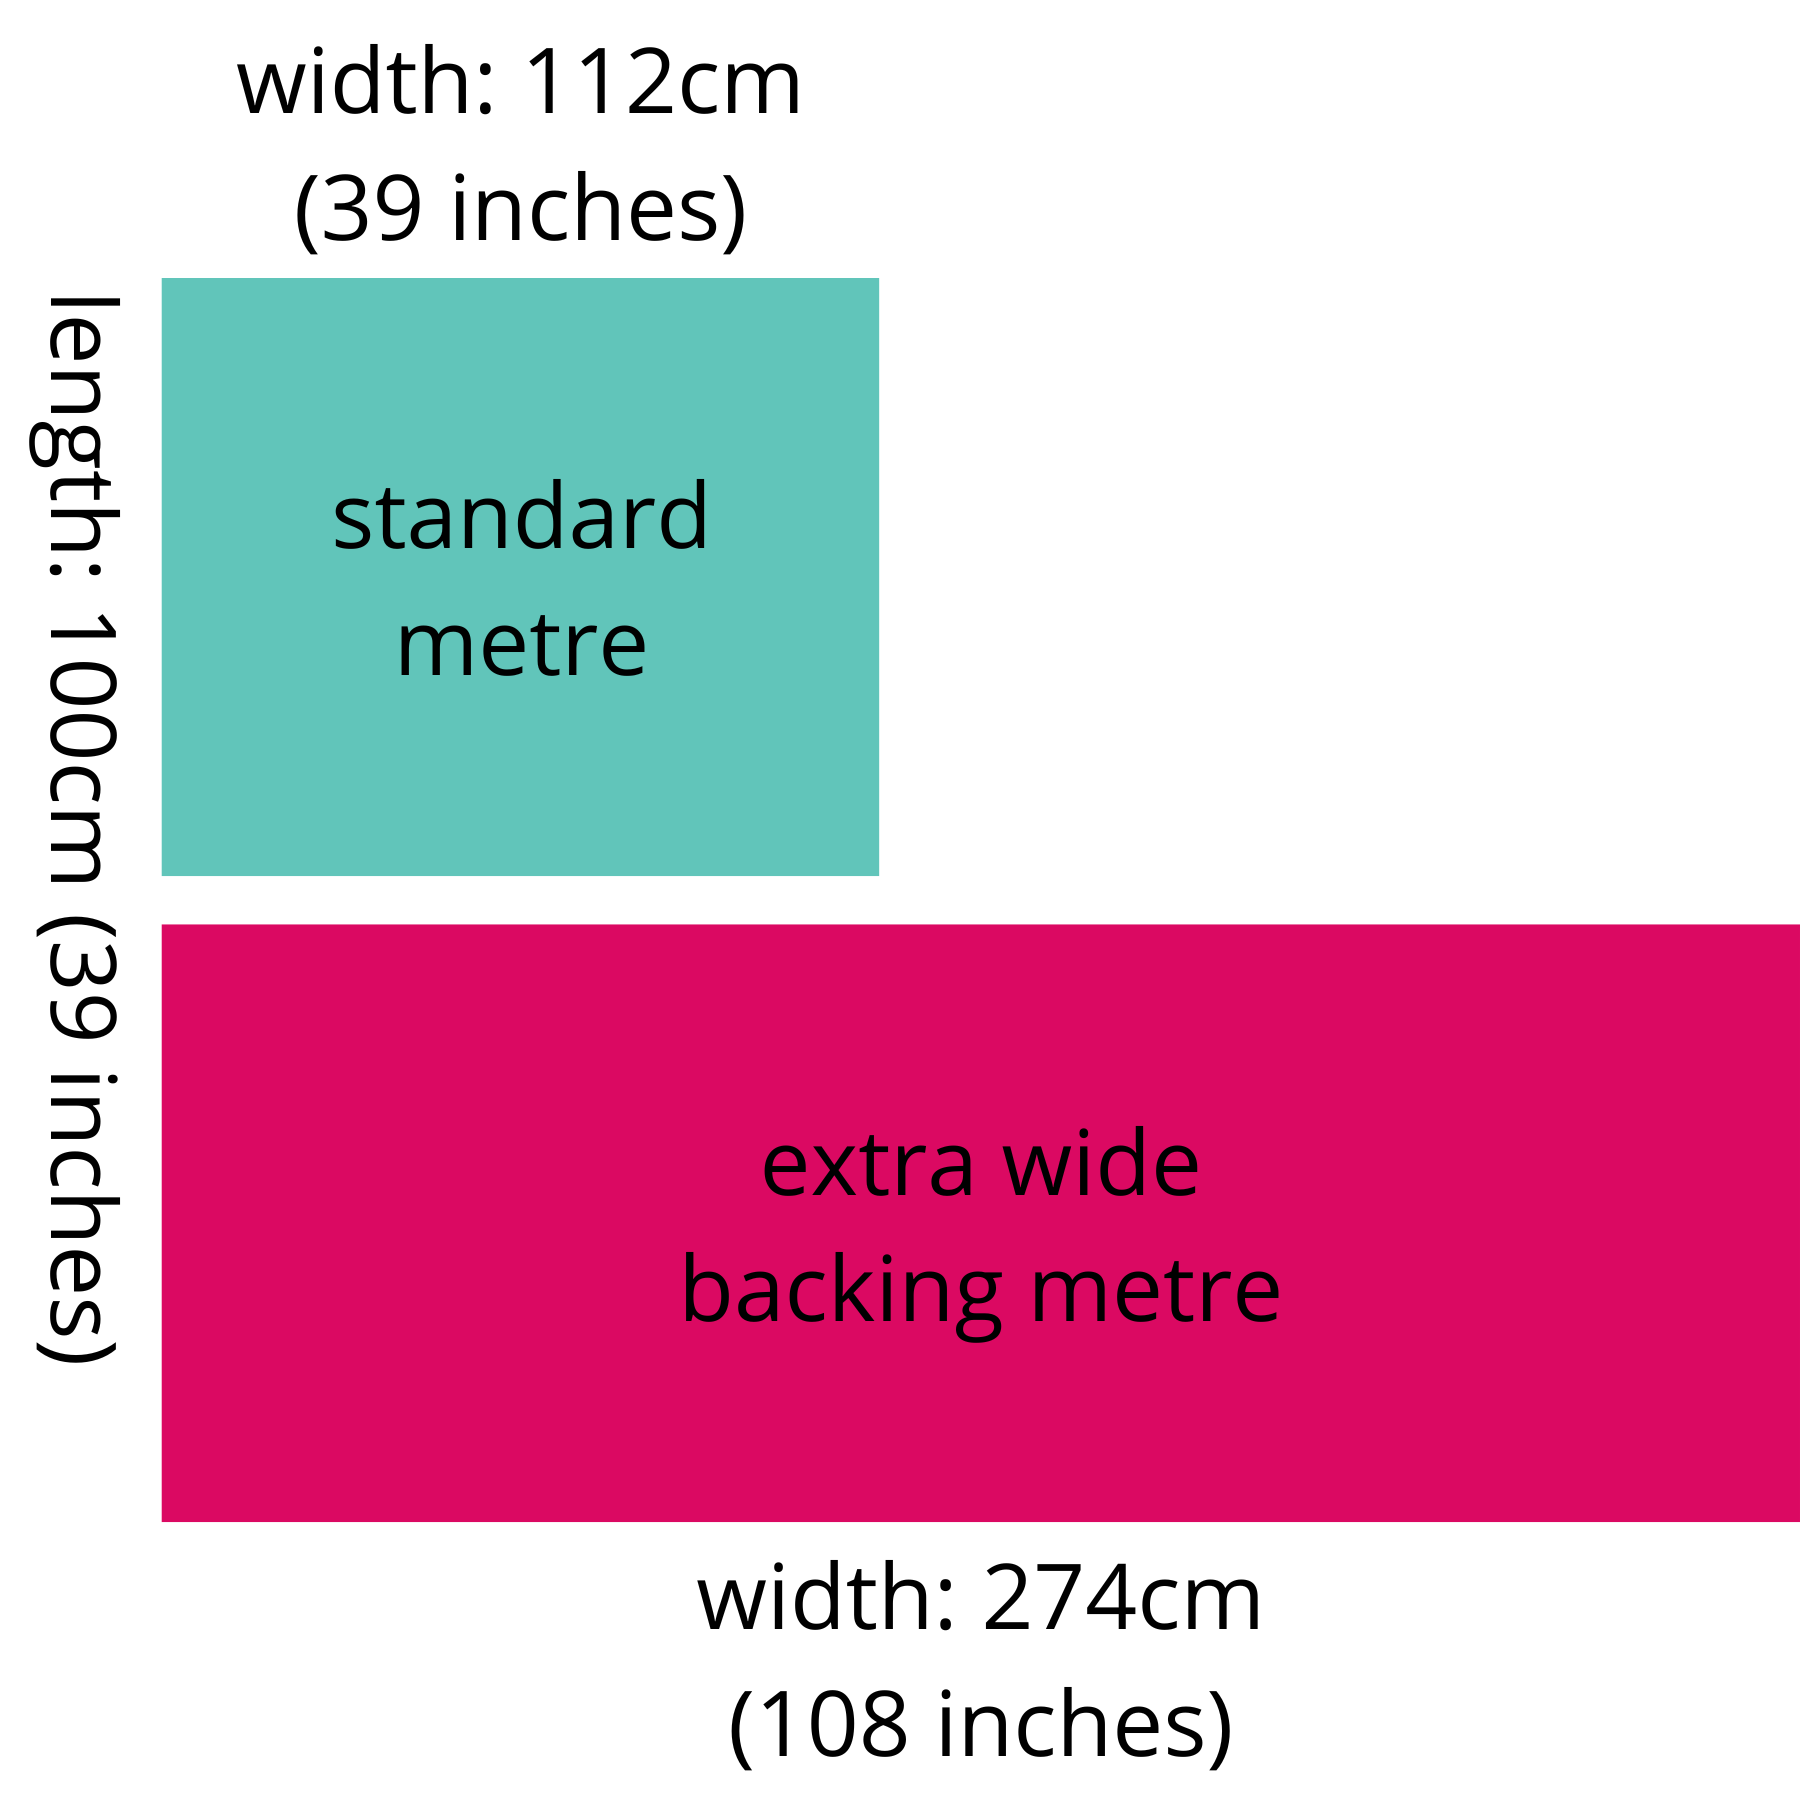 Standard Metre of Quilting Fabric Compared to Extra Wide Metre of Quilt Backing Fabric